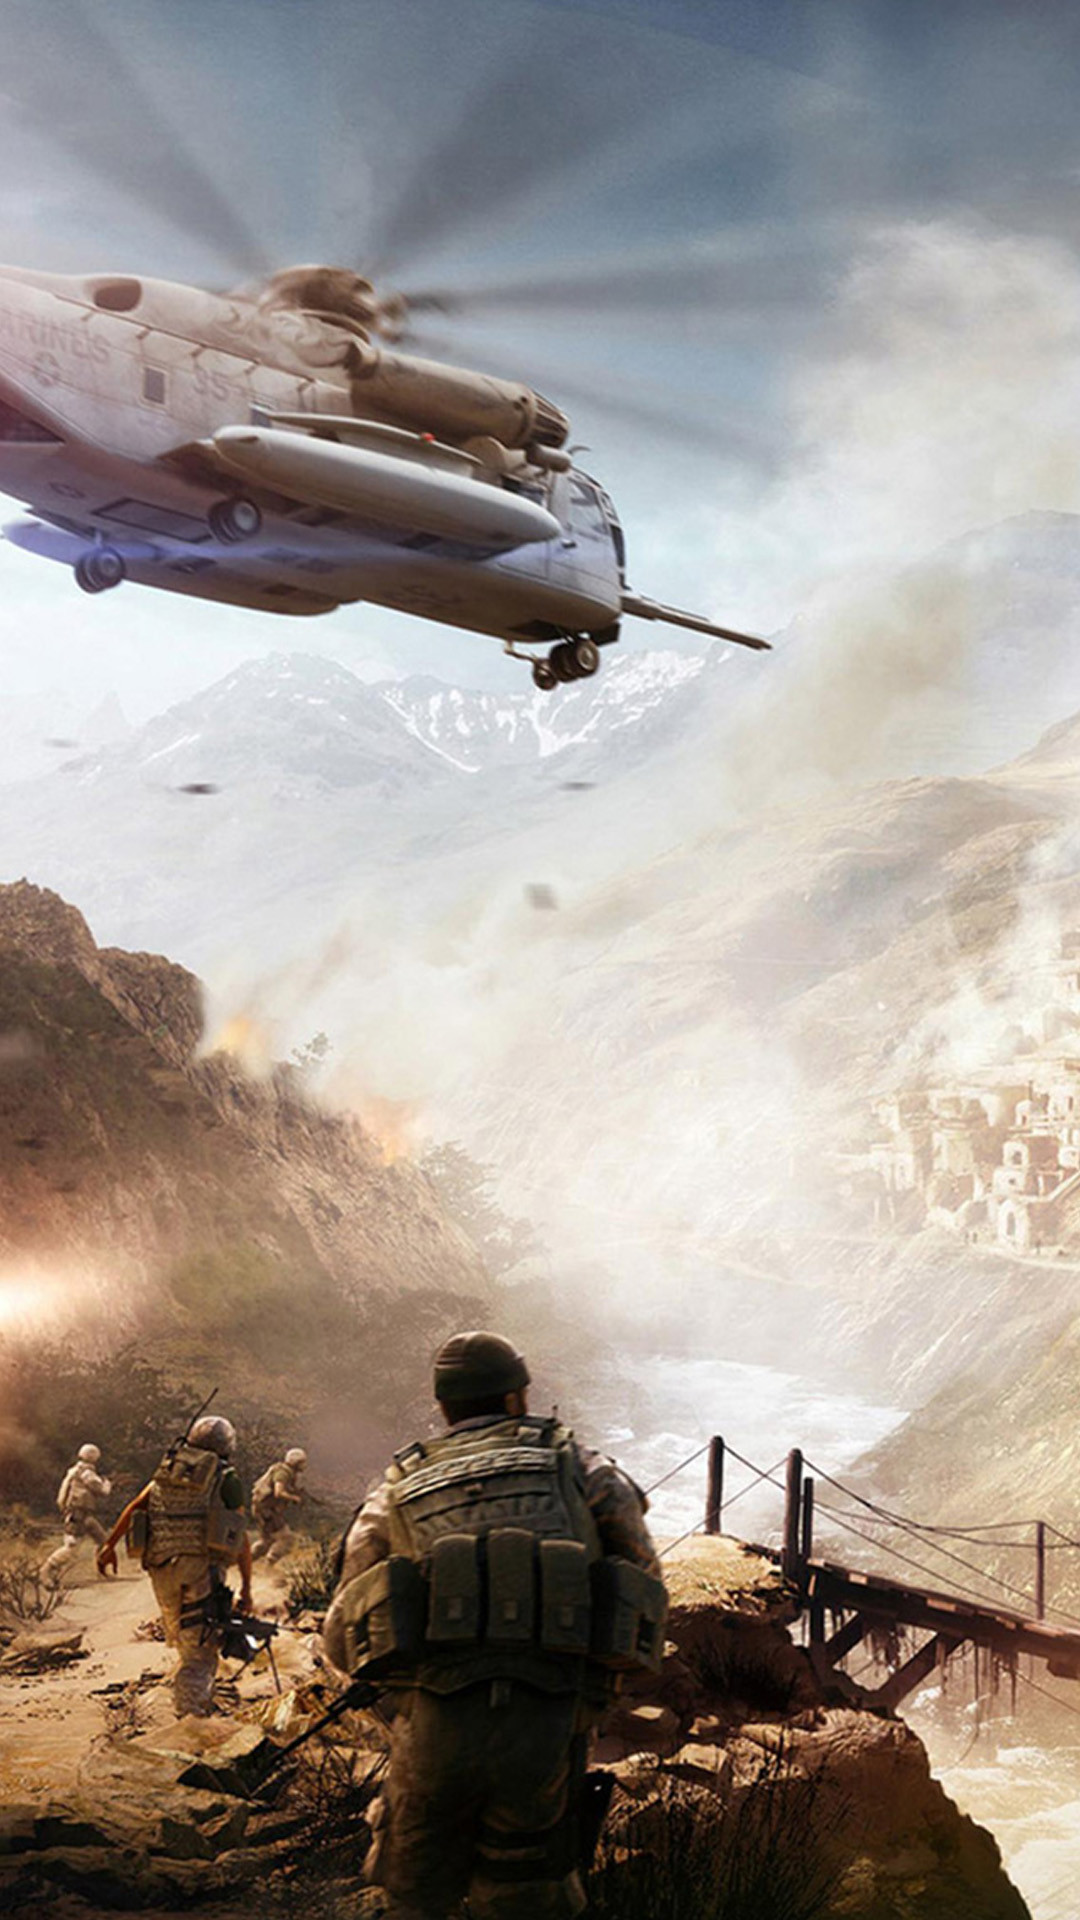 1080x1920 Military Iphone Wallpaper Cool War Games photos Cool Backgrounds For .